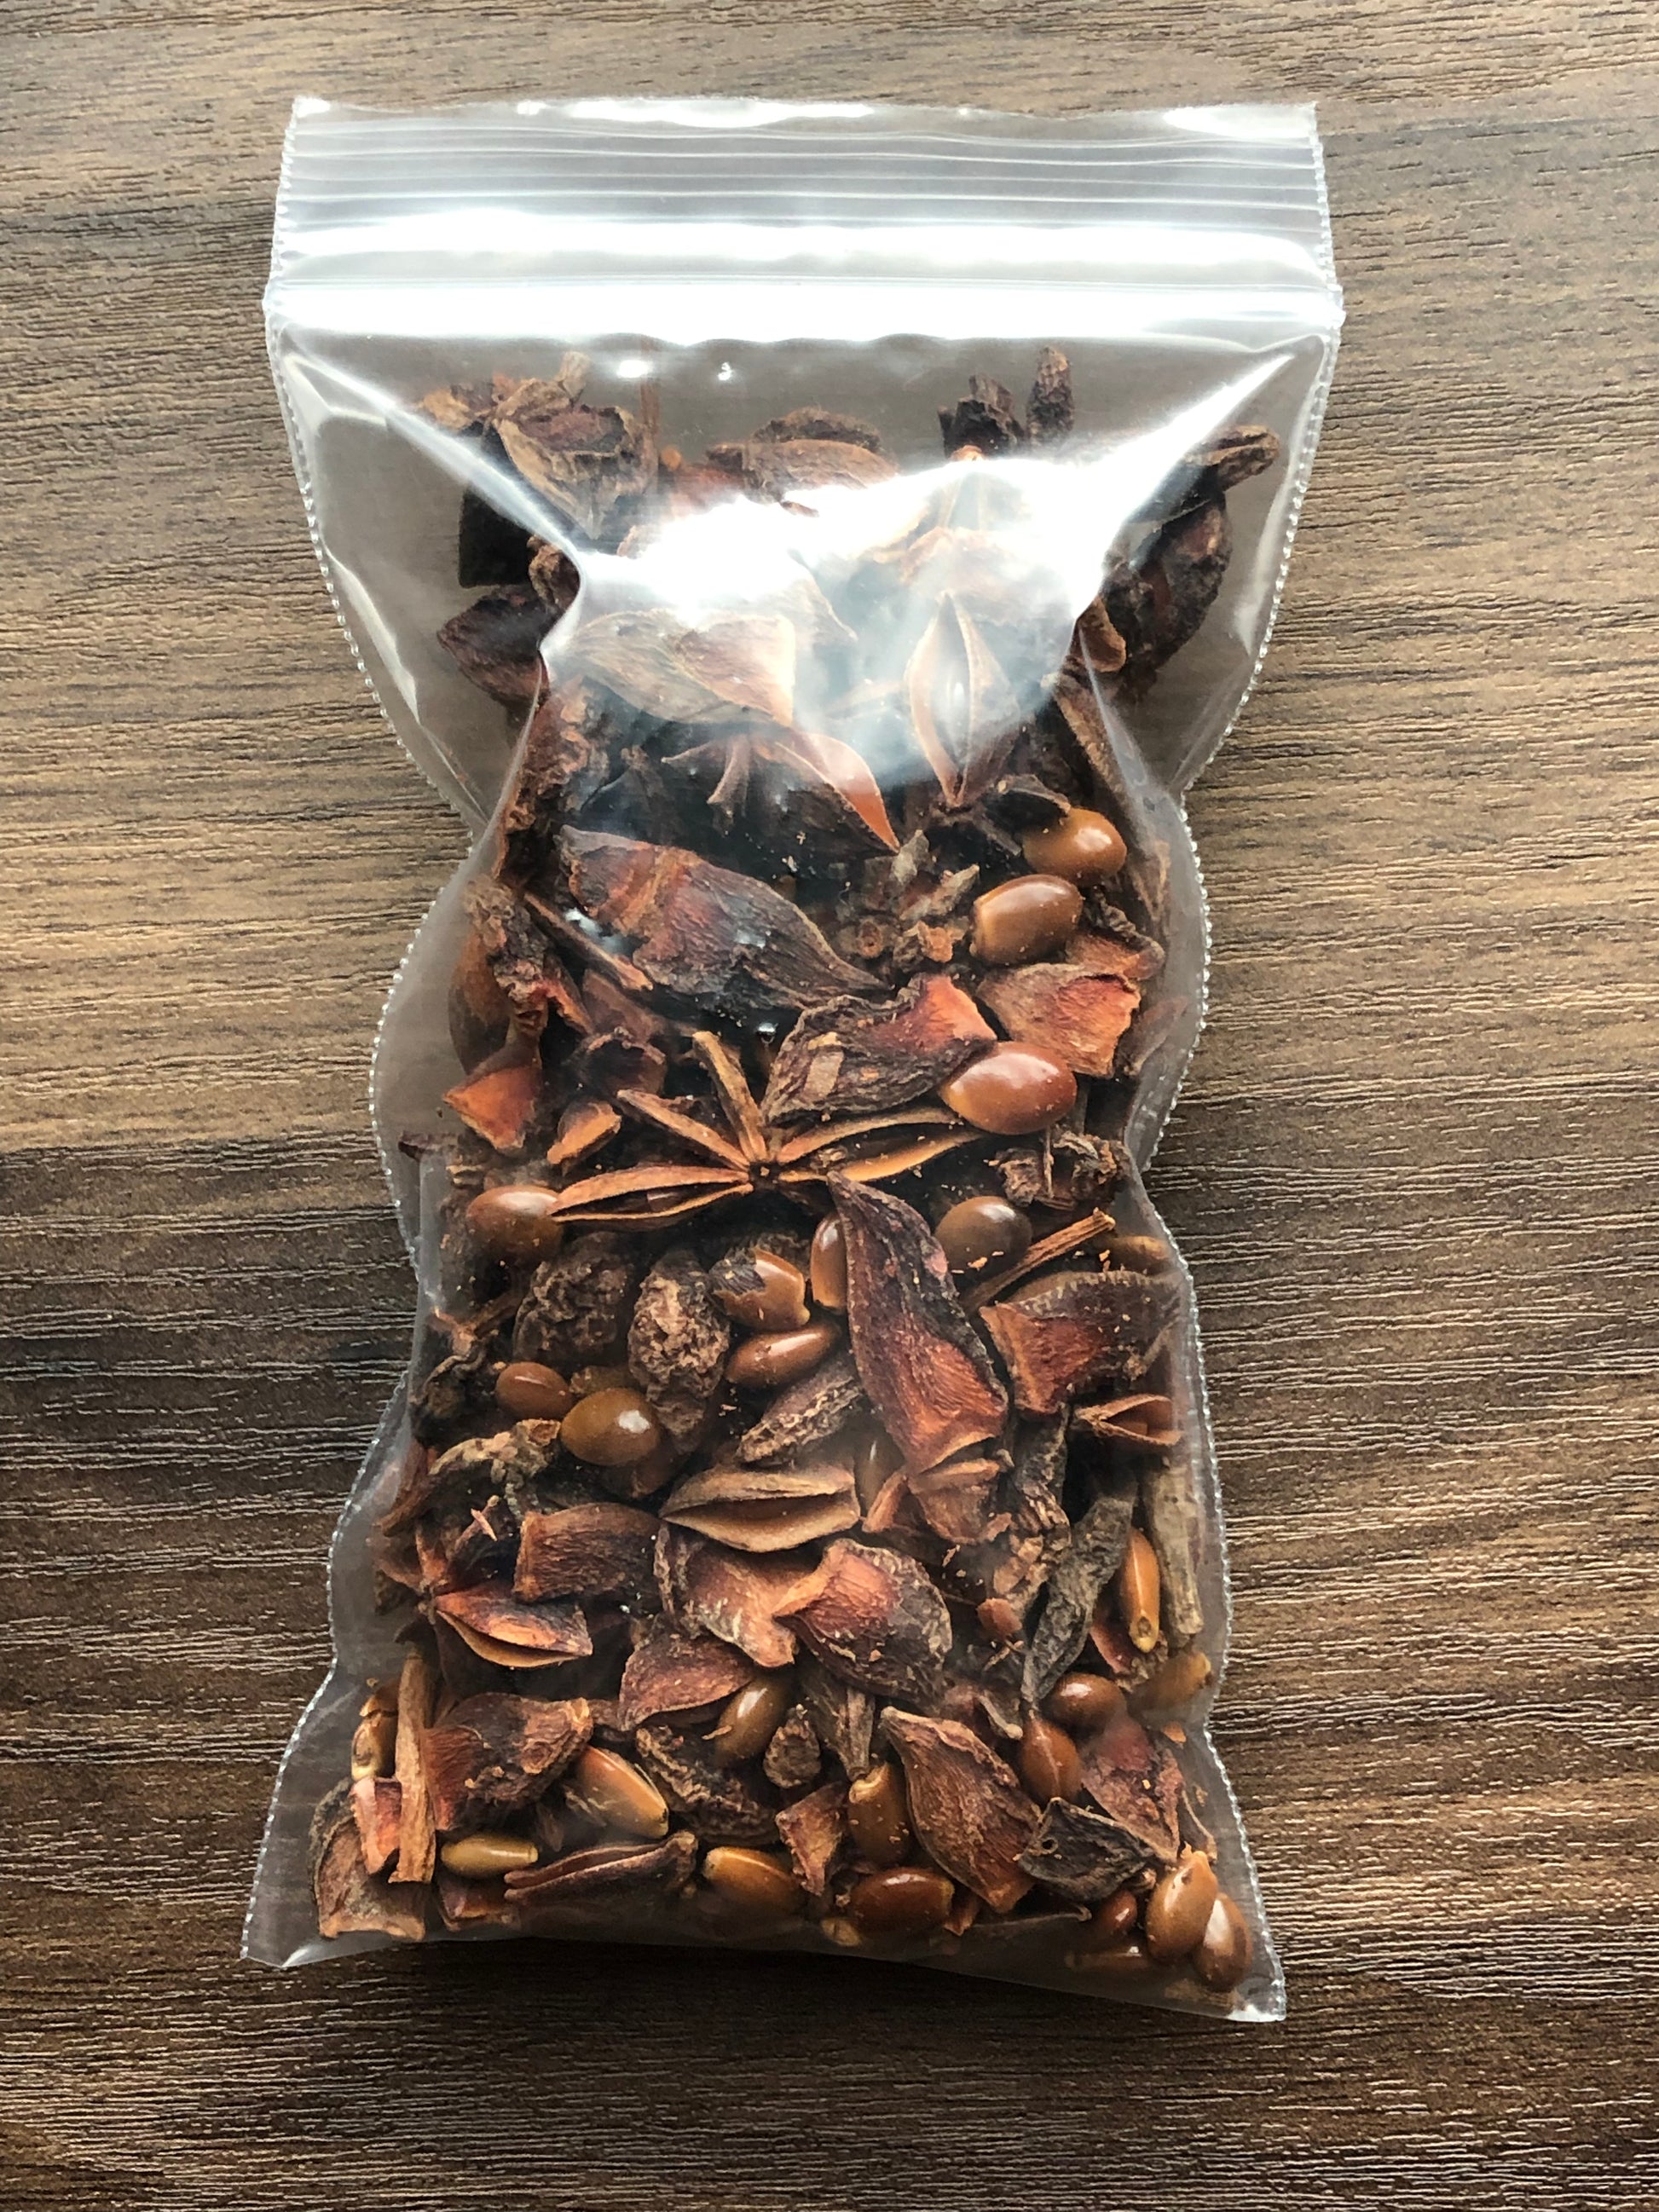 A small plastic bag filled with star anise pieces to show the packaged product rests on a wooden surface. Most pieces are missing petals or are chipped. The star anise pieces are dark brown in color.